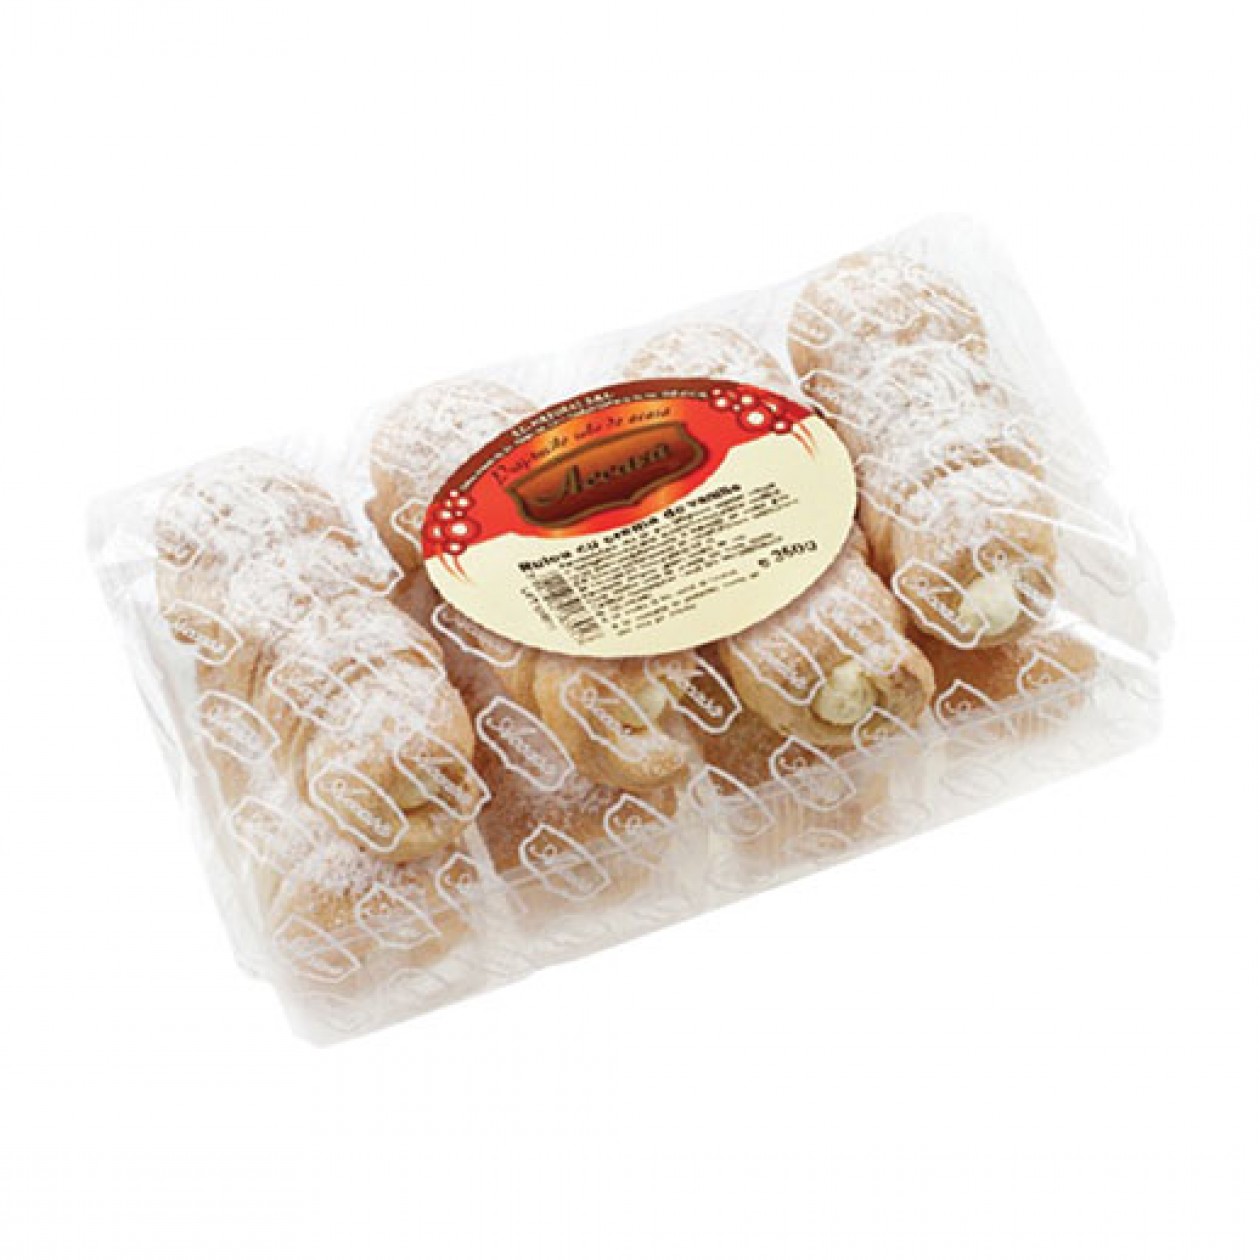 Accasa Puff Pastry Roll With Vanilla Cream 350g